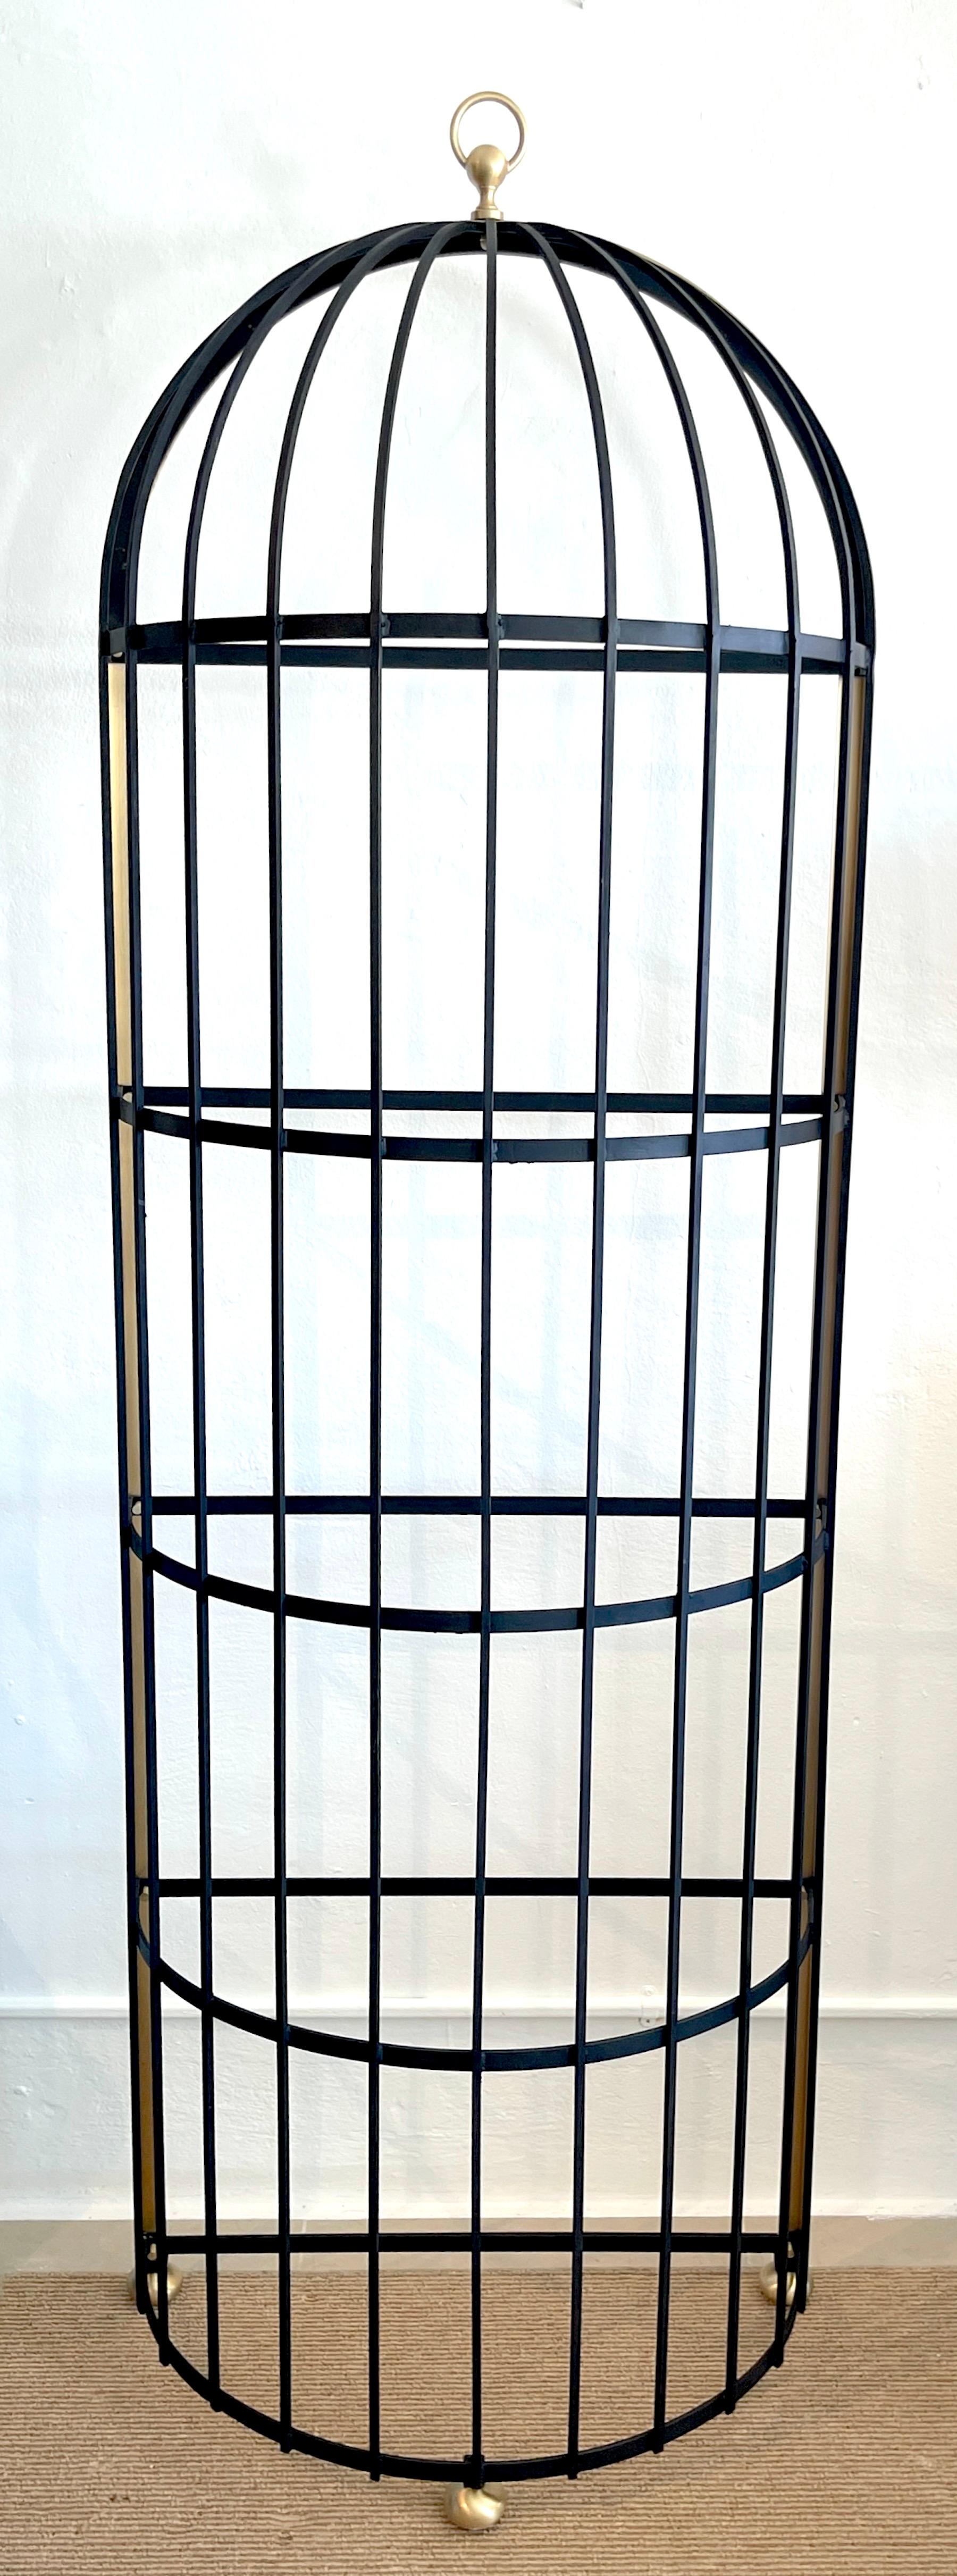 20th Century French Mod Sculptural 'Brid Cage' Motif Brass and Iron Étagère/ Shelf, Restored